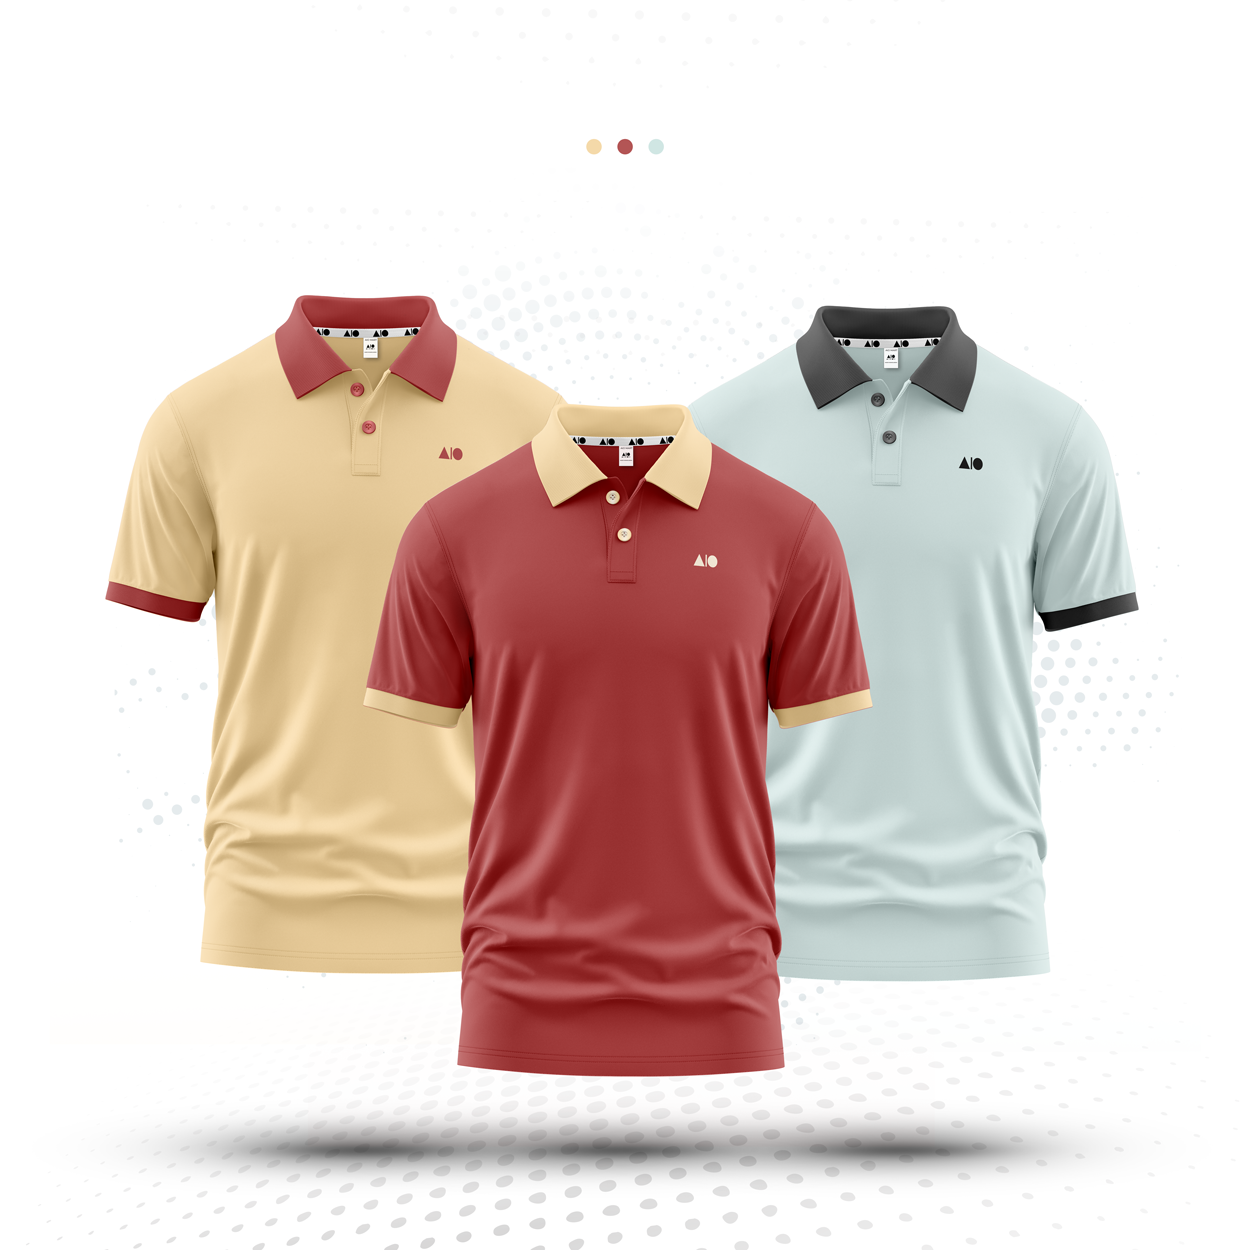 Mens Contrast Polo Shirt - Combo (Light Yellow, Pale Blue, Mexican Red)